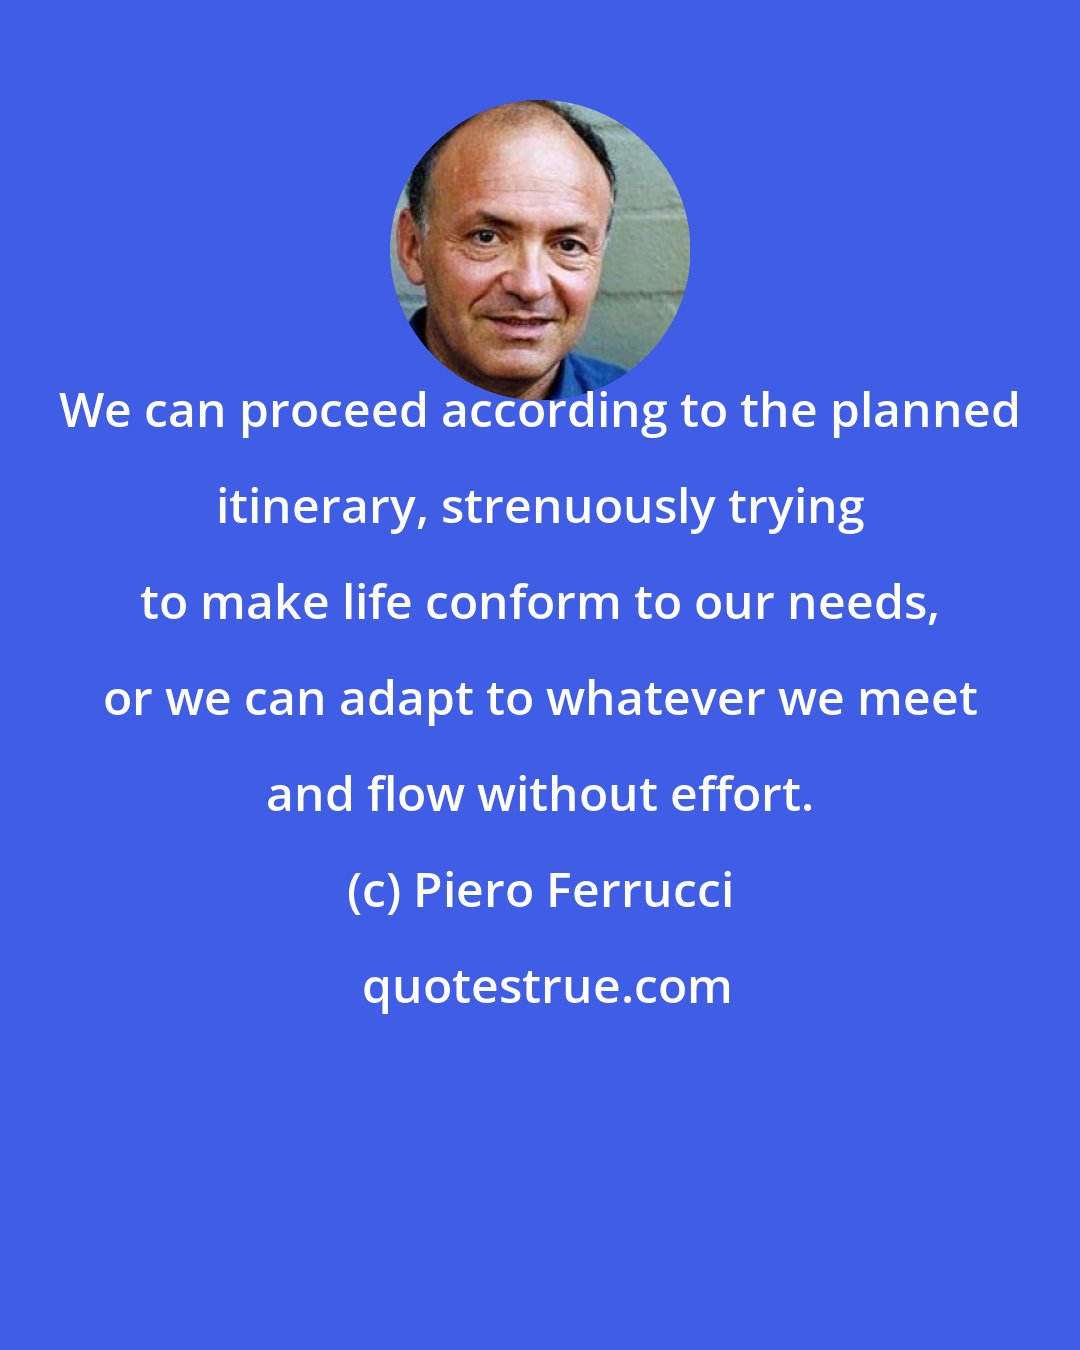 Piero Ferrucci: We can proceed according to the planned itinerary, strenuously trying to make life conform to our needs, or we can adapt to whatever we meet and flow without effort.